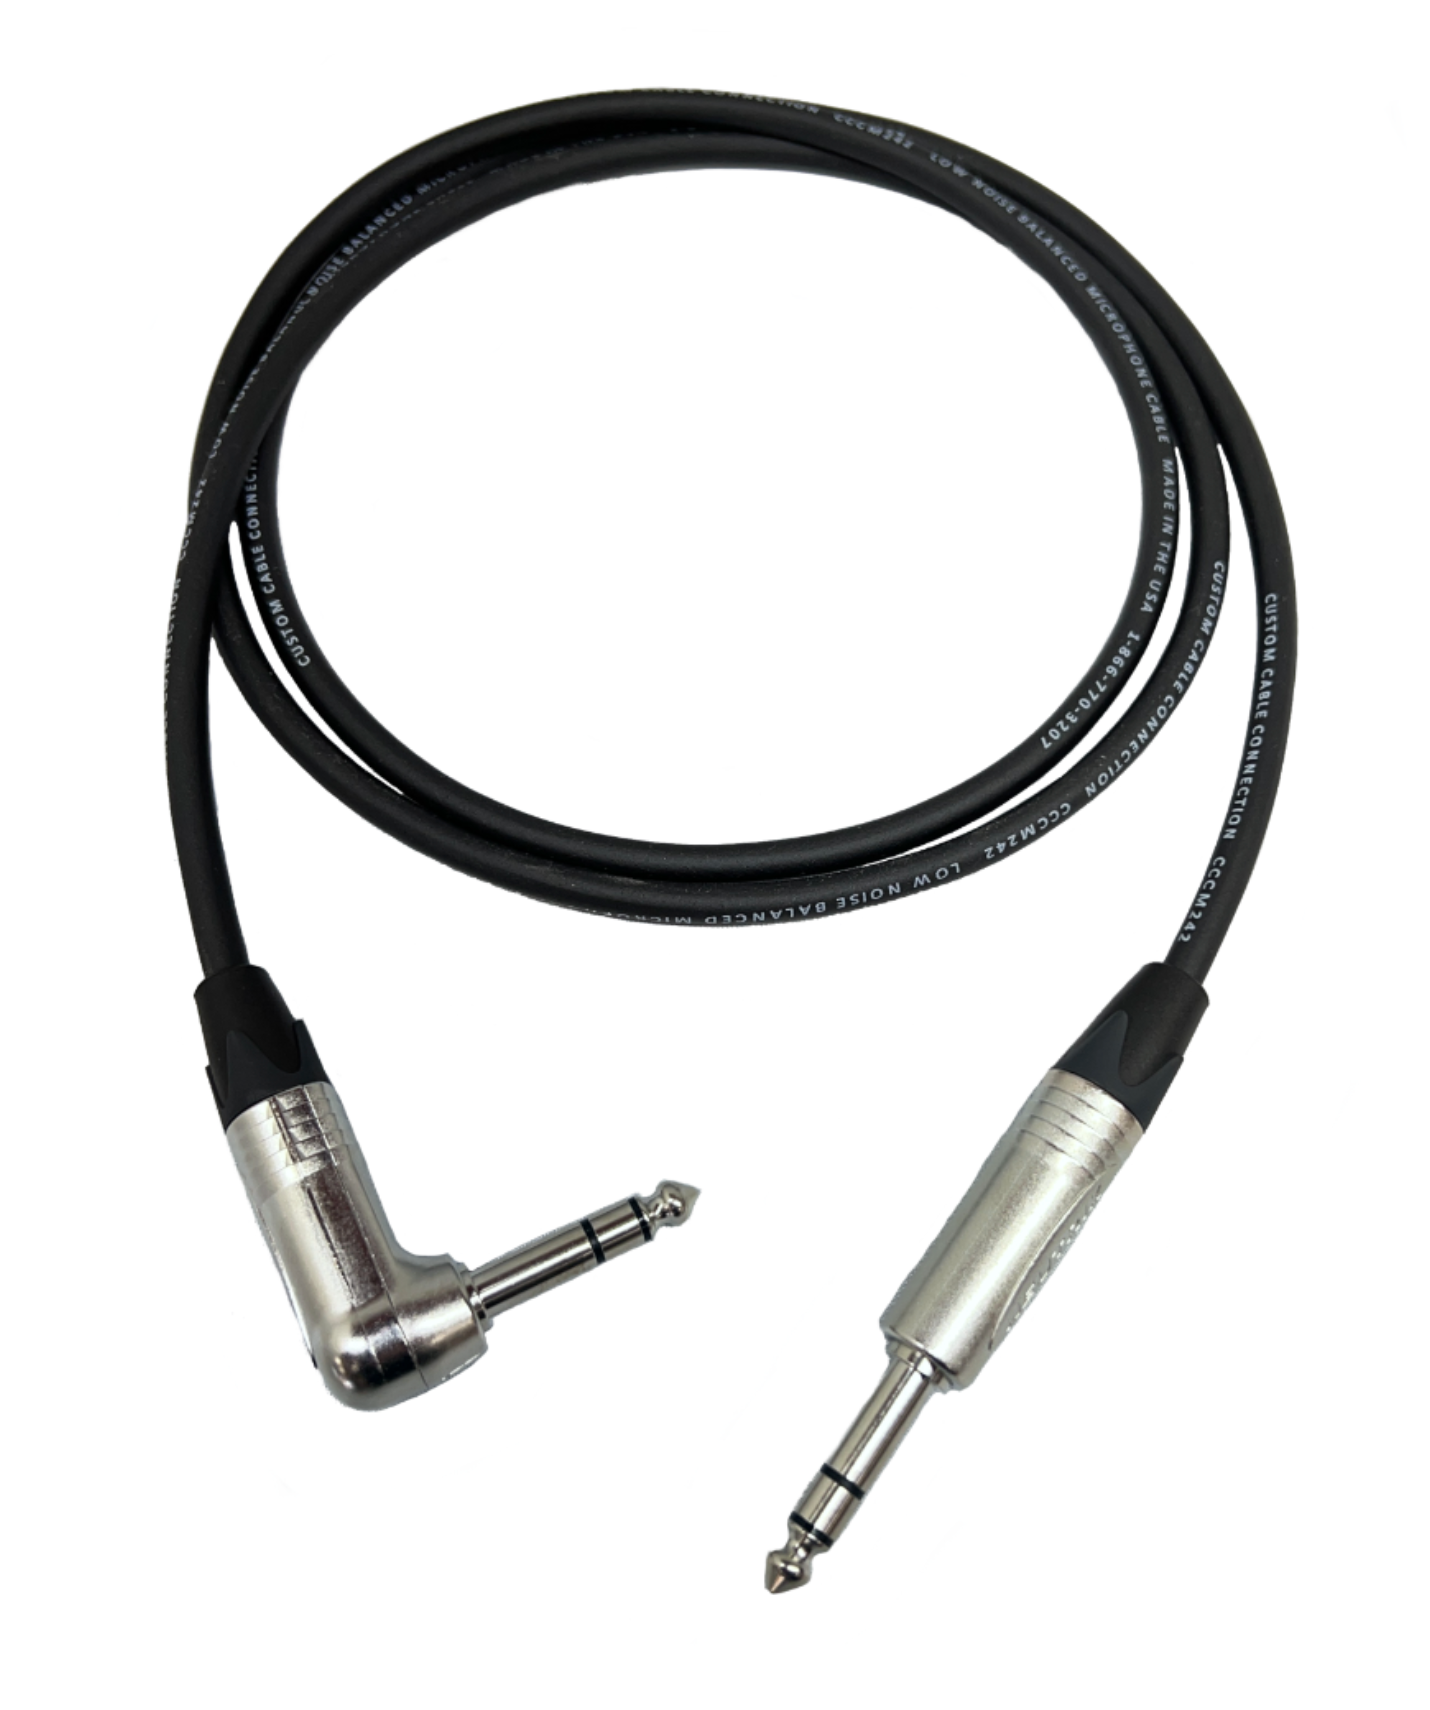 XLR Audio Cable with Male Right Angle to Female Straight Neutrik Conne -  Custom Cable Connection